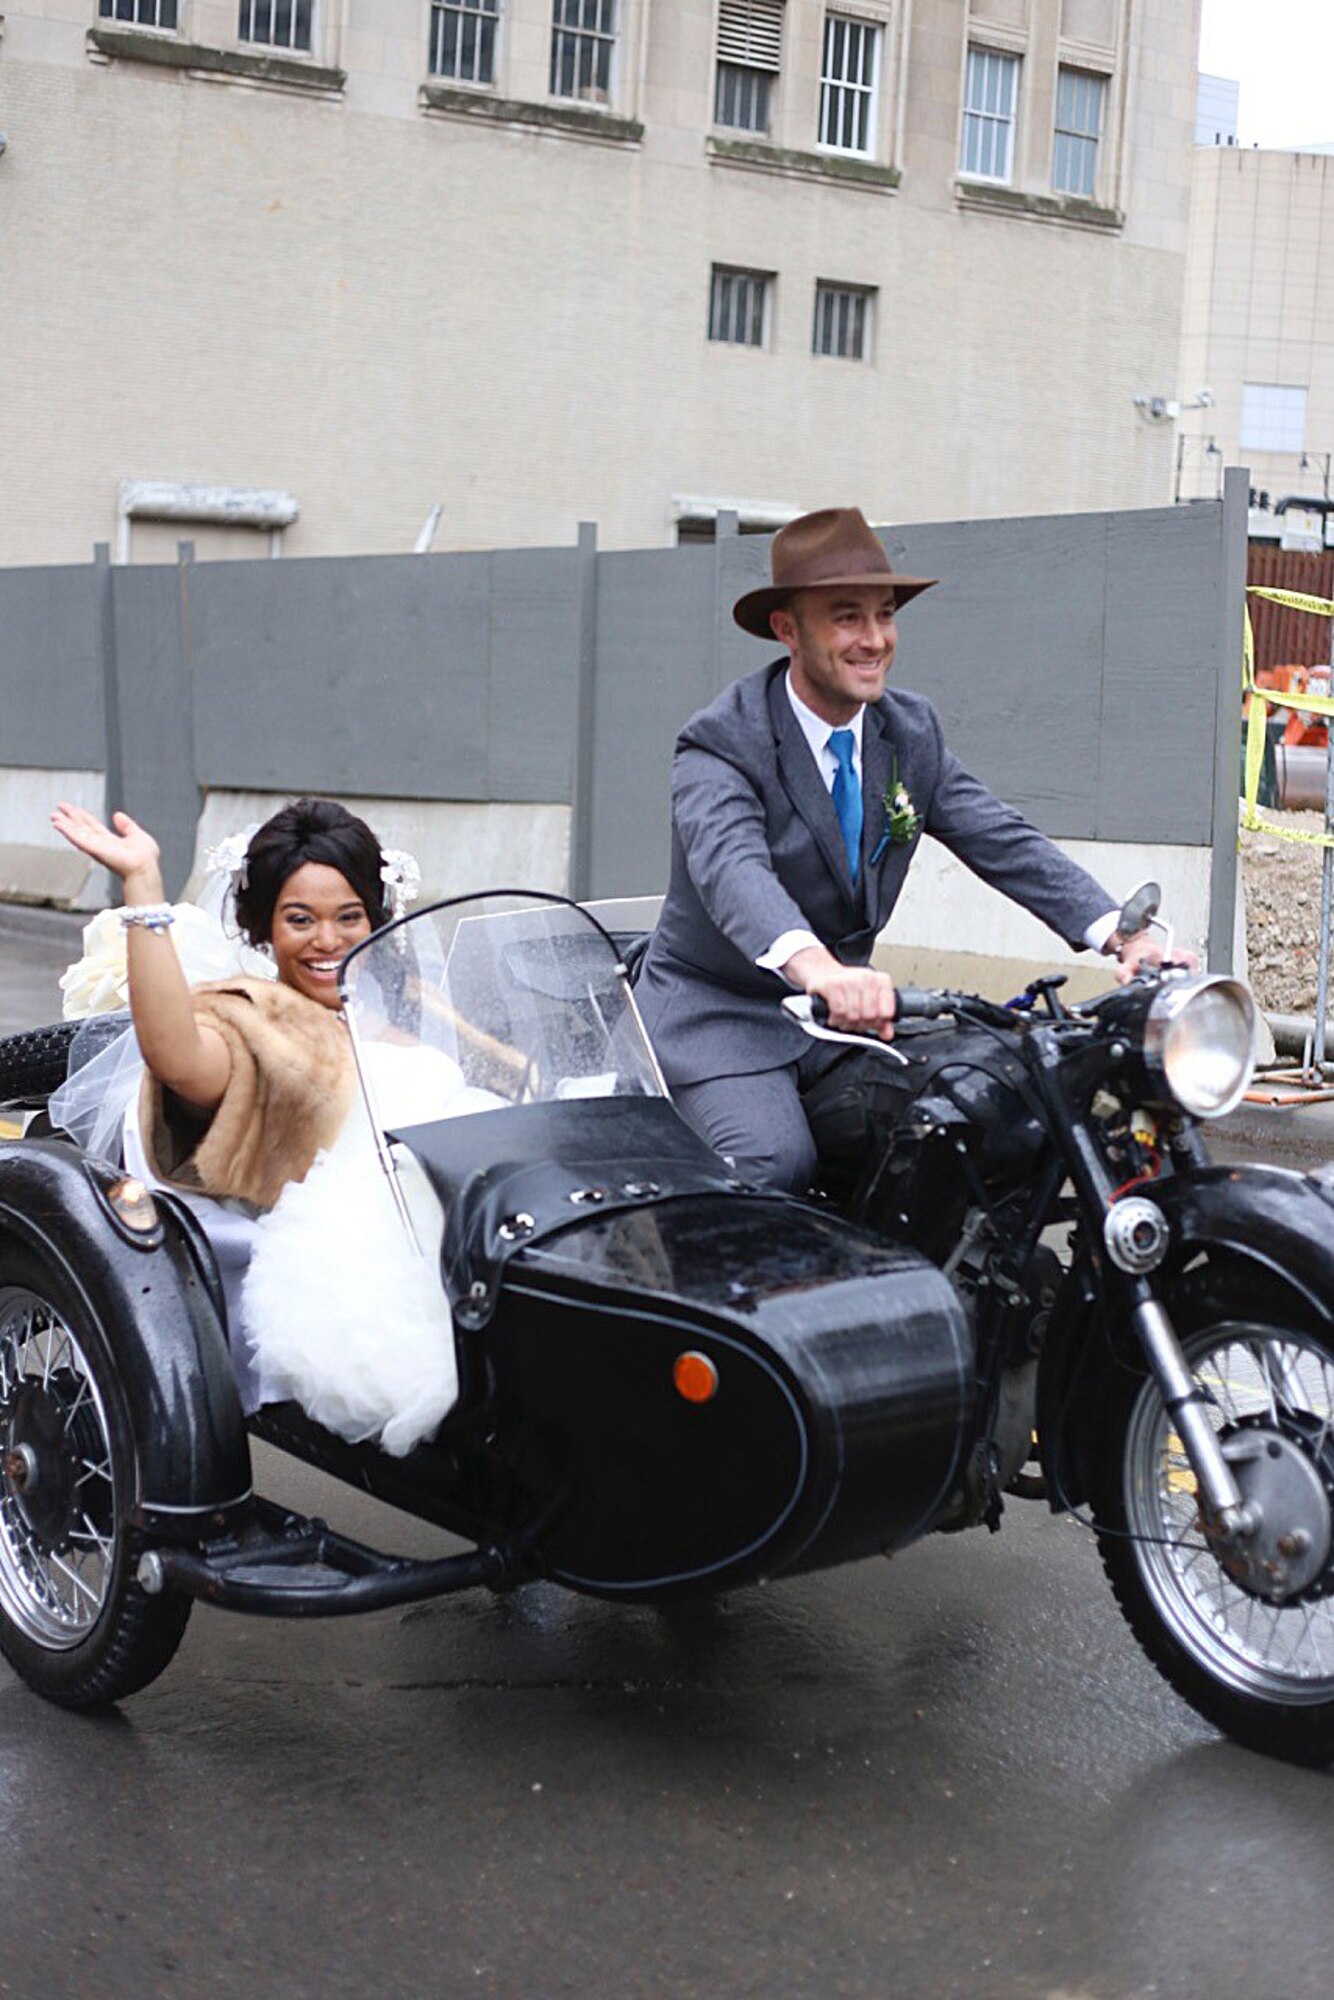 U.S. Air Force Capt. Renee Cassidy, the 509th Maintenance Operations officer in charge, and Capt. Justin Cassidy, the 13th Aircraft Maintenance Unit officer in charge, depart on their motorcycle following a vow renewal ceremony in Kansas City, Mo., May 2015. (Courtesy photo)